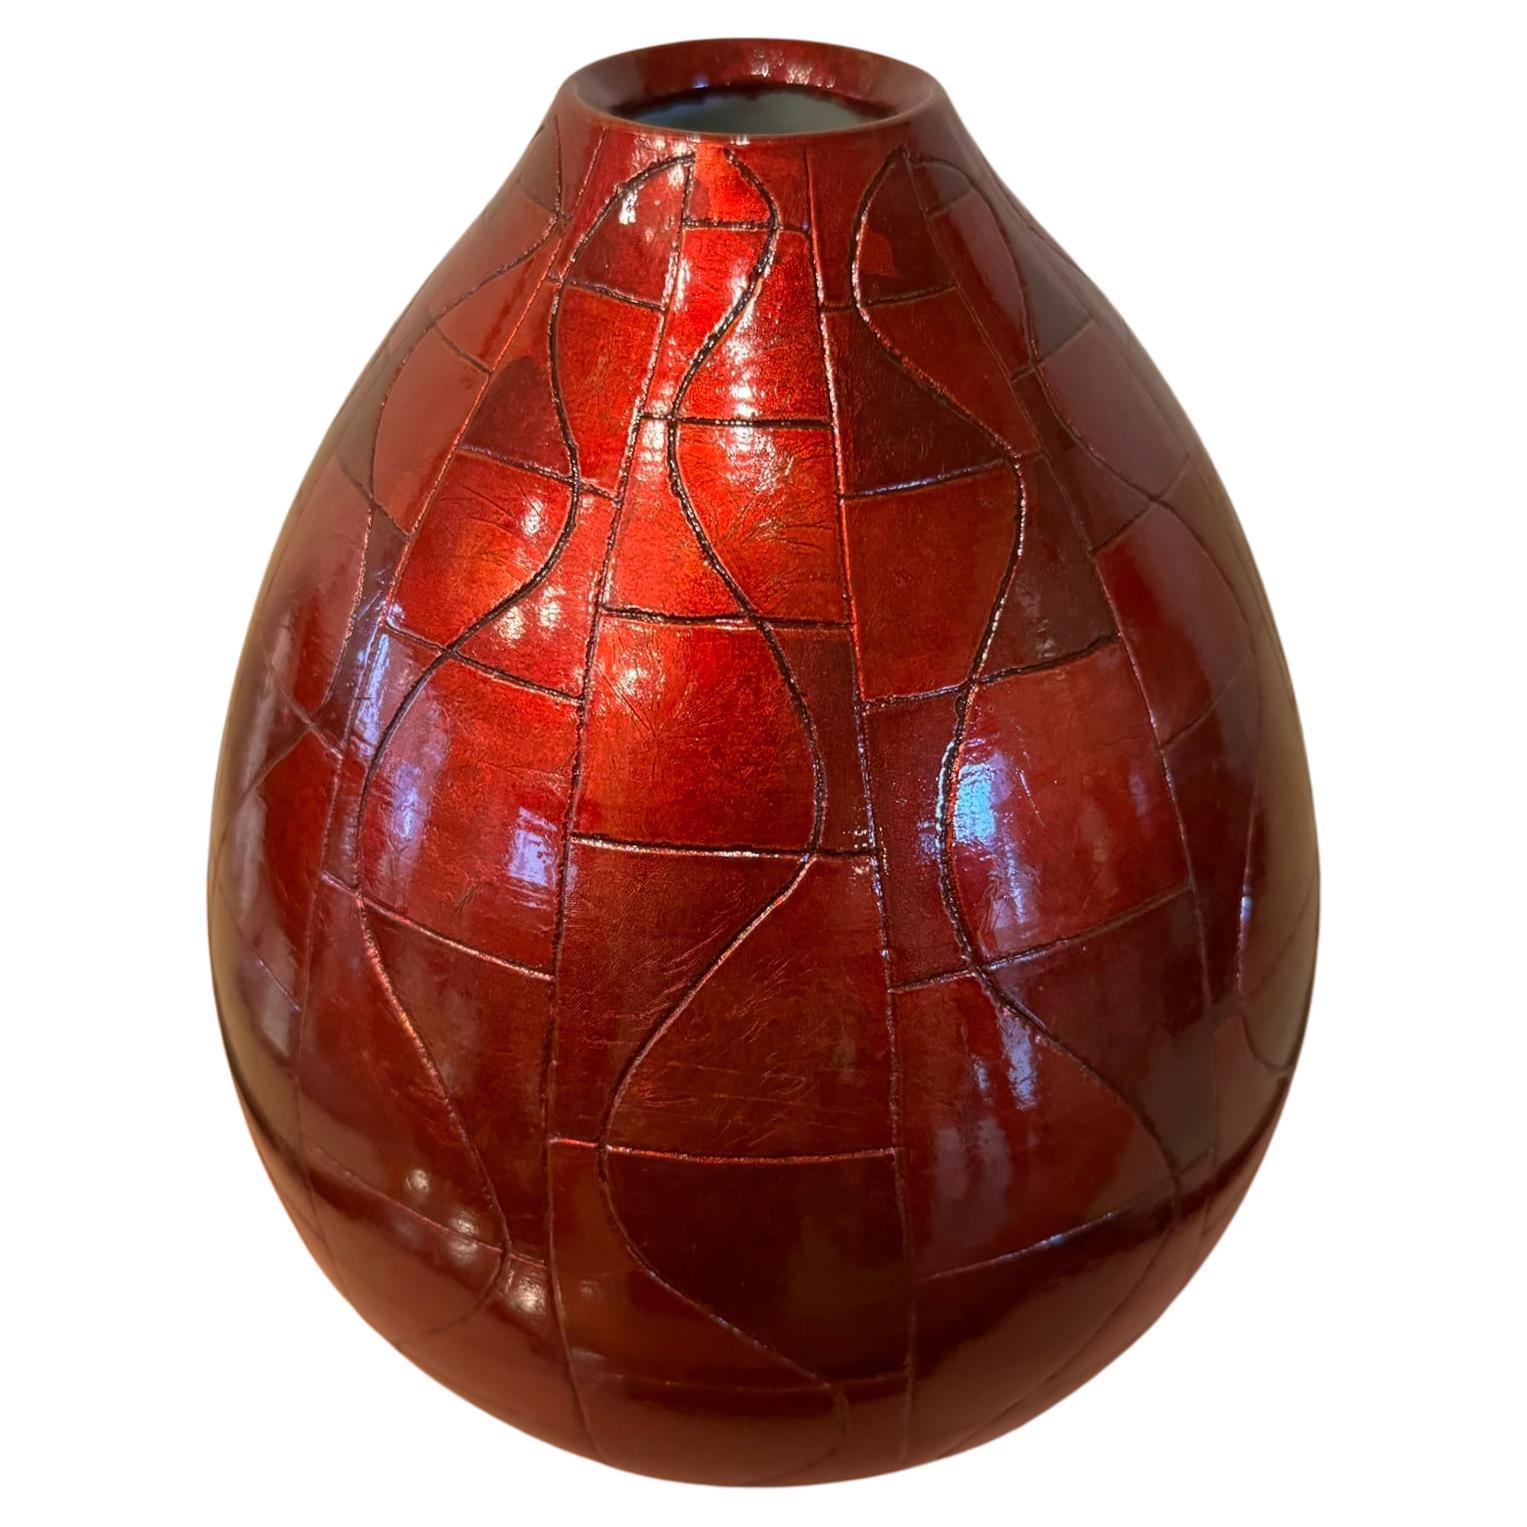 Exquisite Japanese contemporary museum quality decorative porcelain vase in a stunning shape featuring high purity silver leafs tinted in four beautiful shades of red meticulously positioned to create a patchwork motif using lacquer as an adhesive